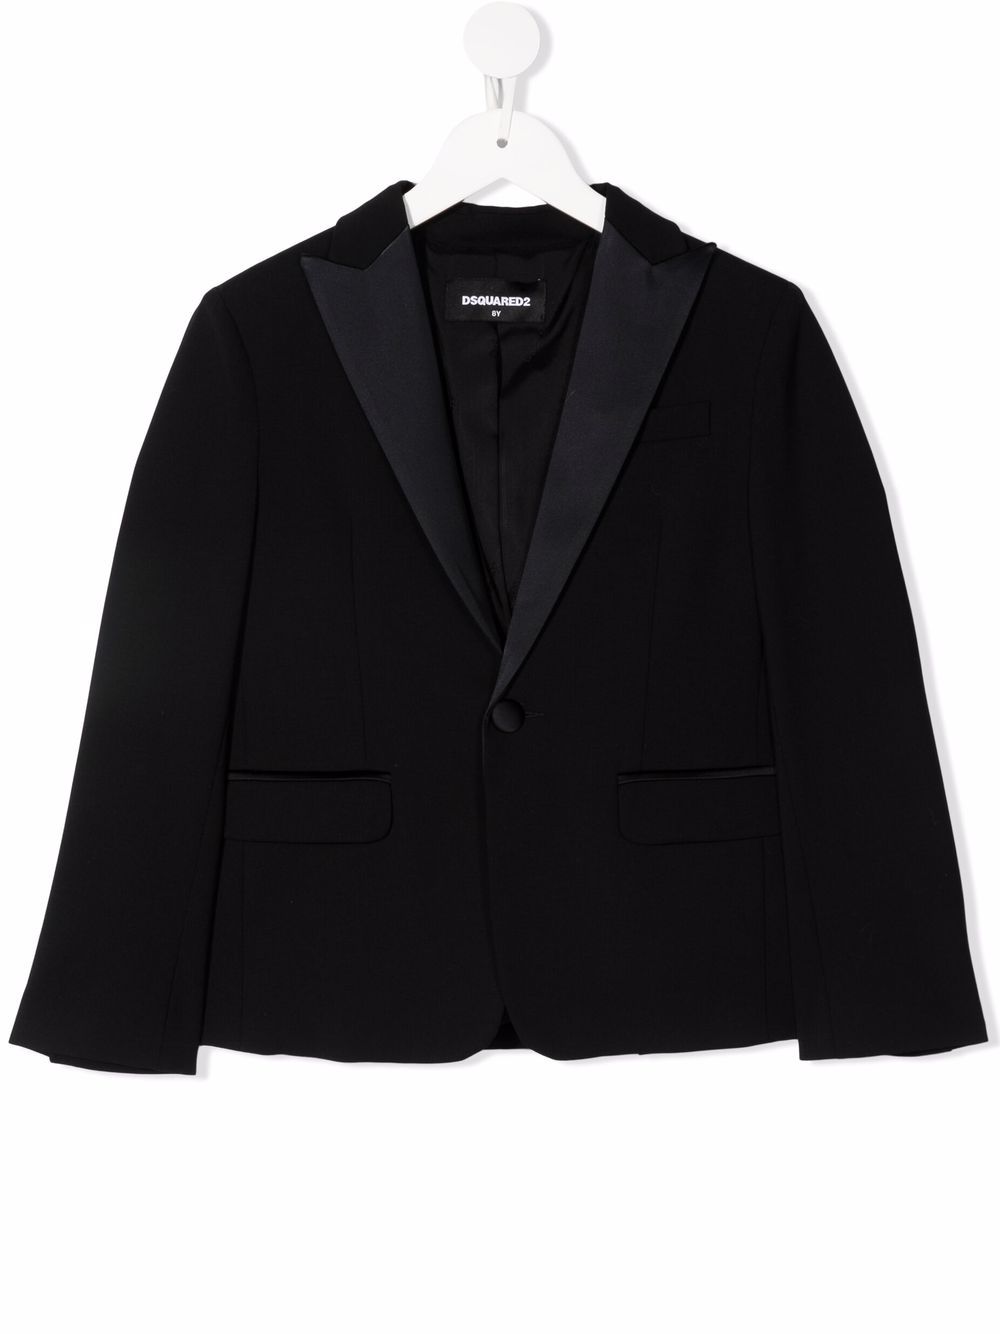 Image 1 of Dsquared2 Kids single-breasted blazer